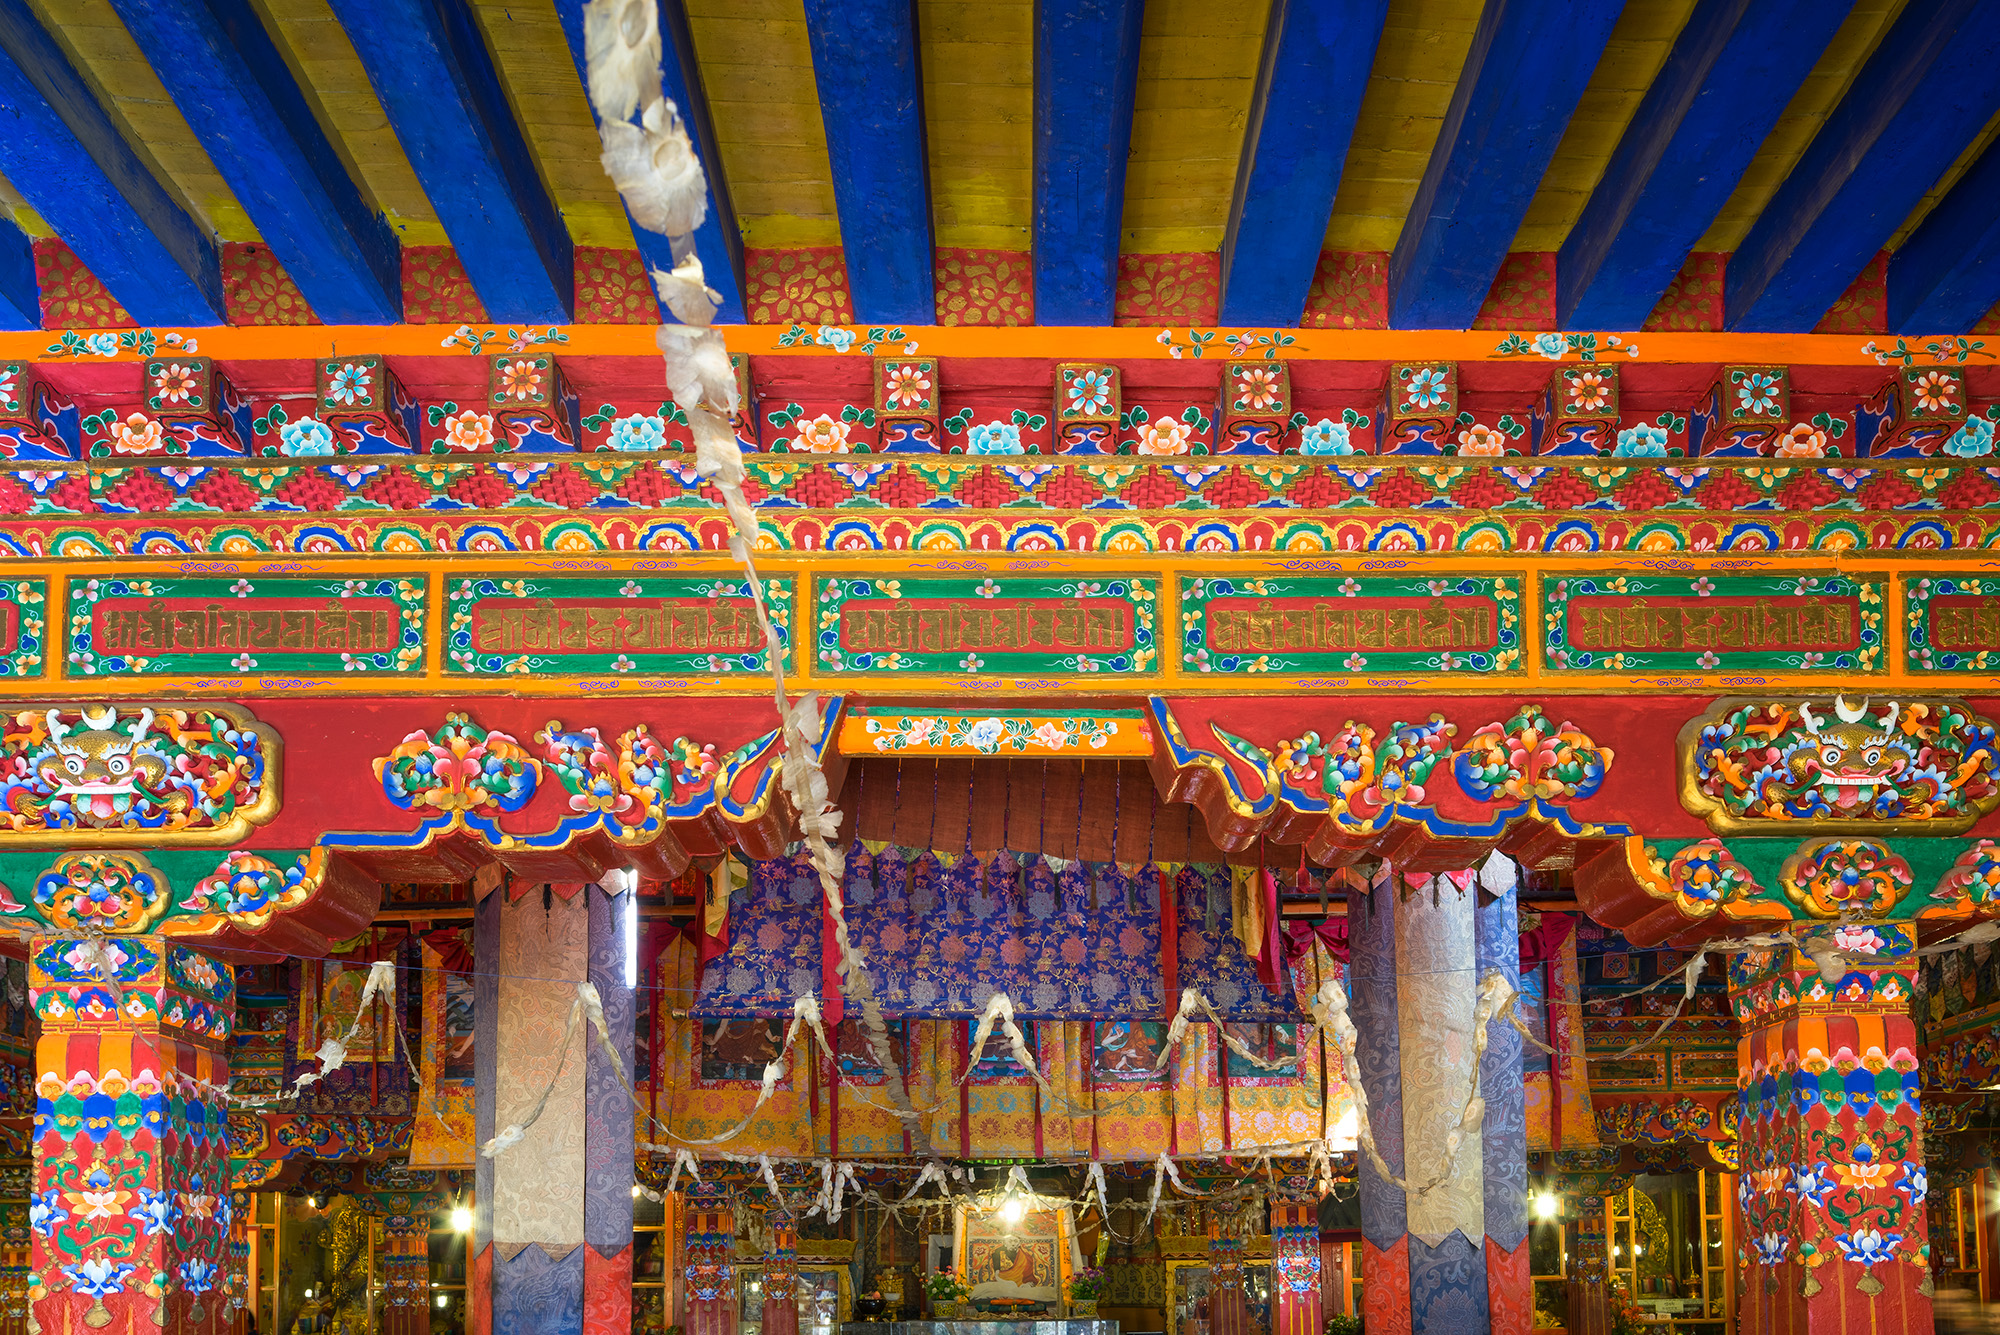 Within the sacred walls of the Drepung Monastery in Lhasa, Tibet, this photograph captures a riot of colors and intricate details...